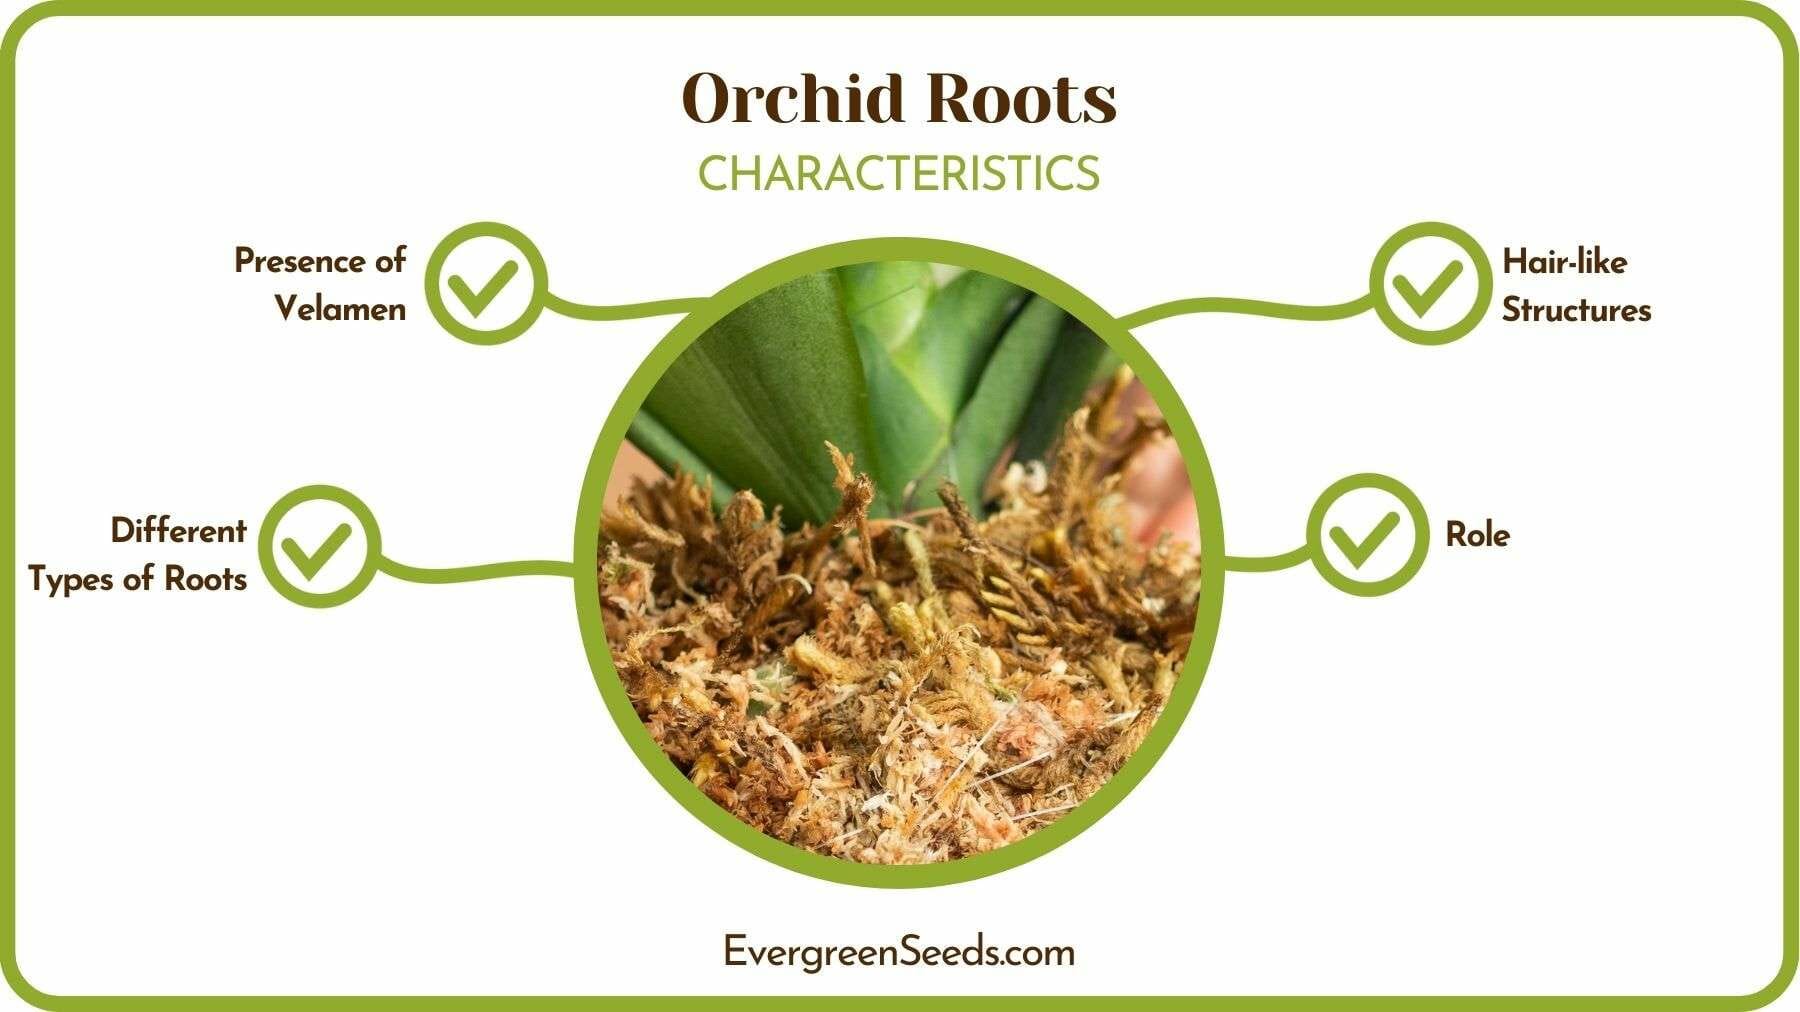 Specifications of Orchid Roots